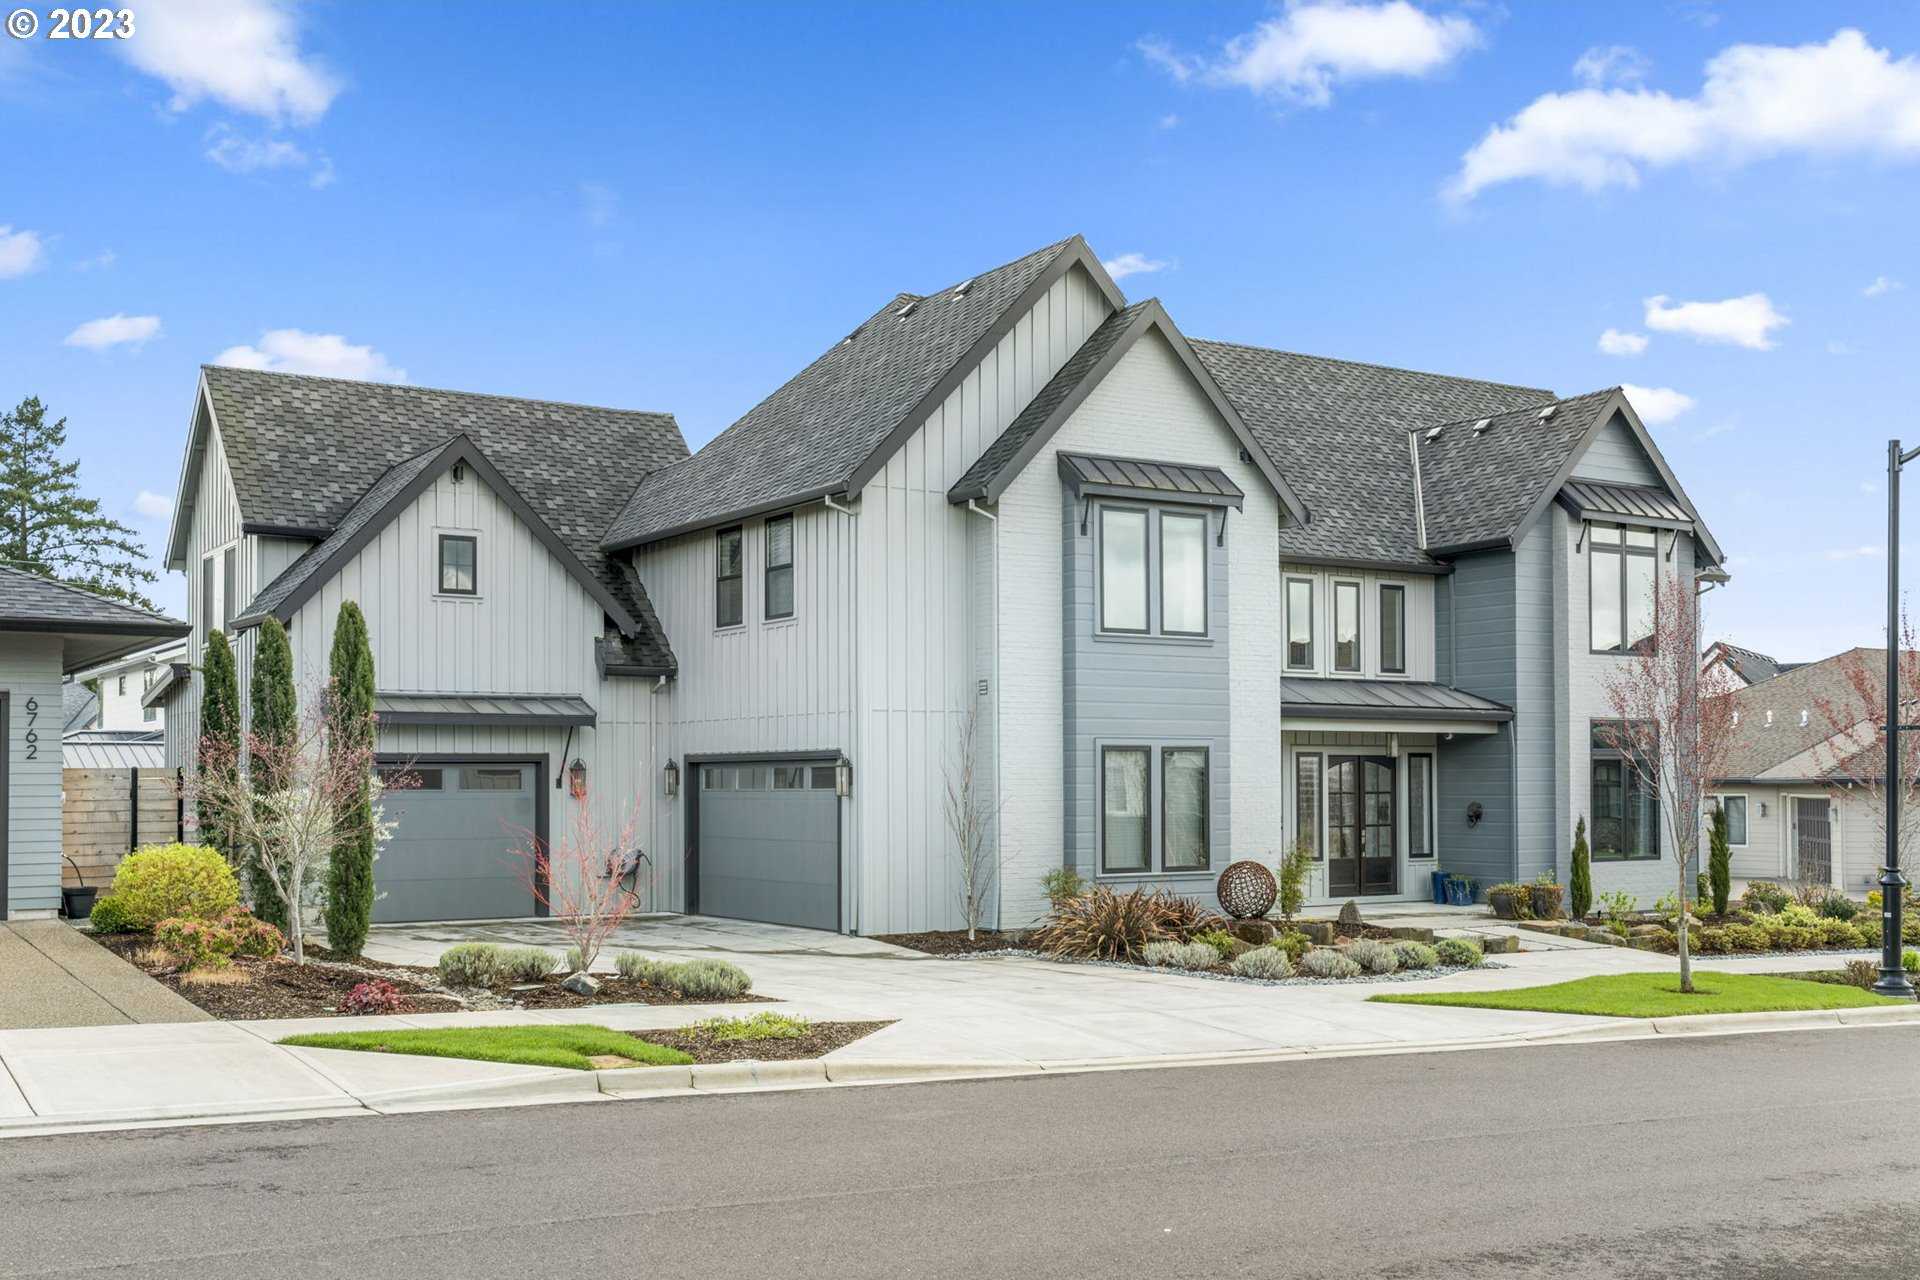 $1,990,000 - 4Br/5Ba -  for Sale in 2019 Nw Nat'l Street Of Dreams, Wilsonville